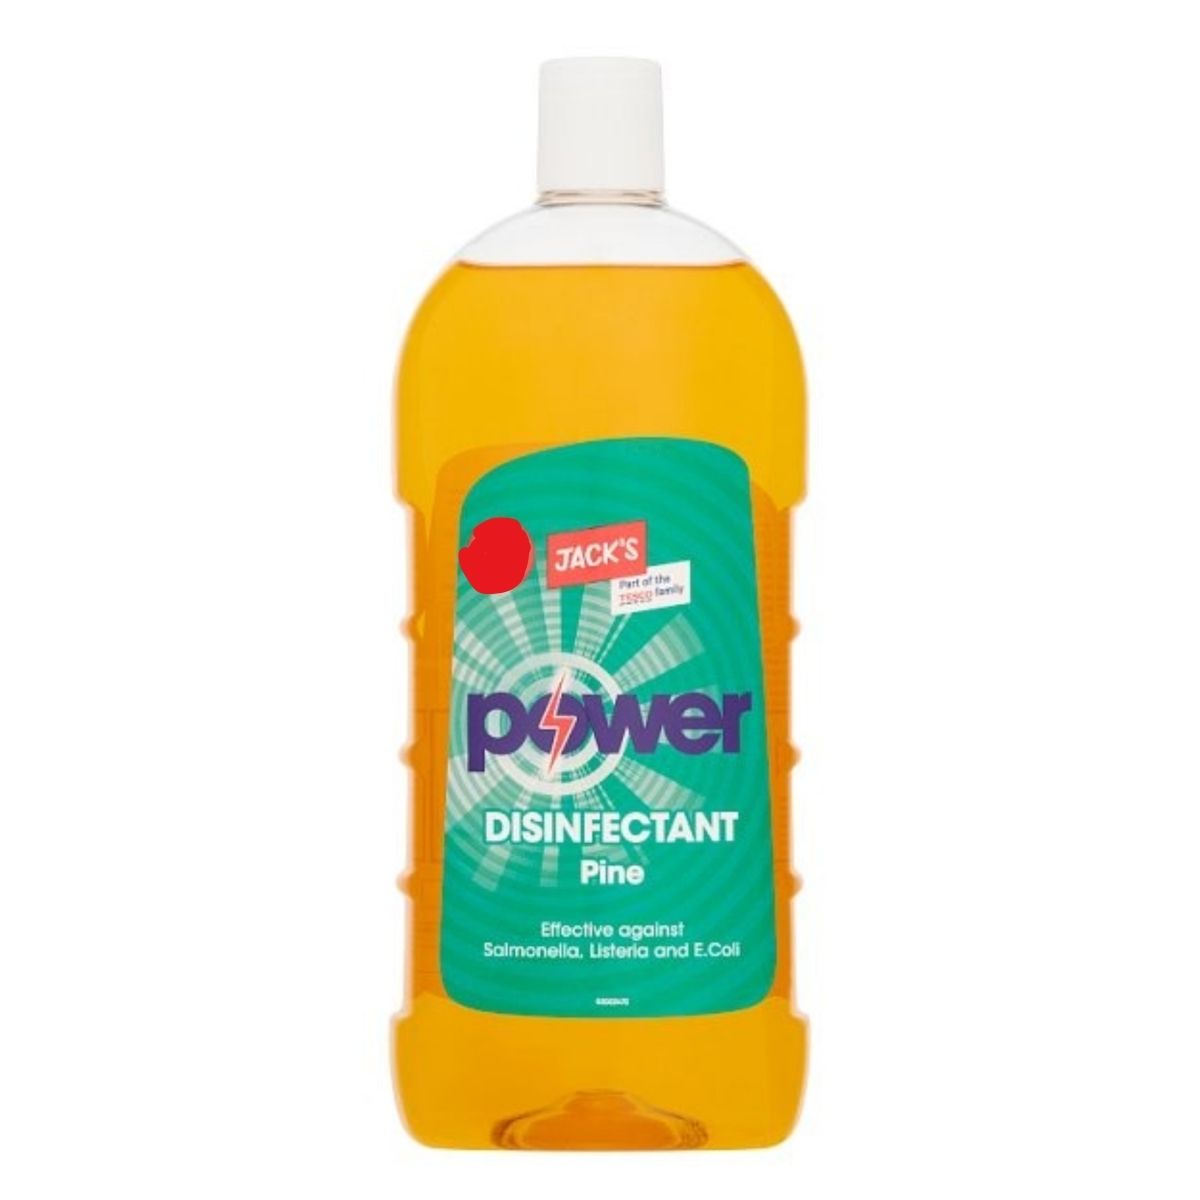 A bottle of Jacks - Power Disinfectant Pine - 1L on a white background.